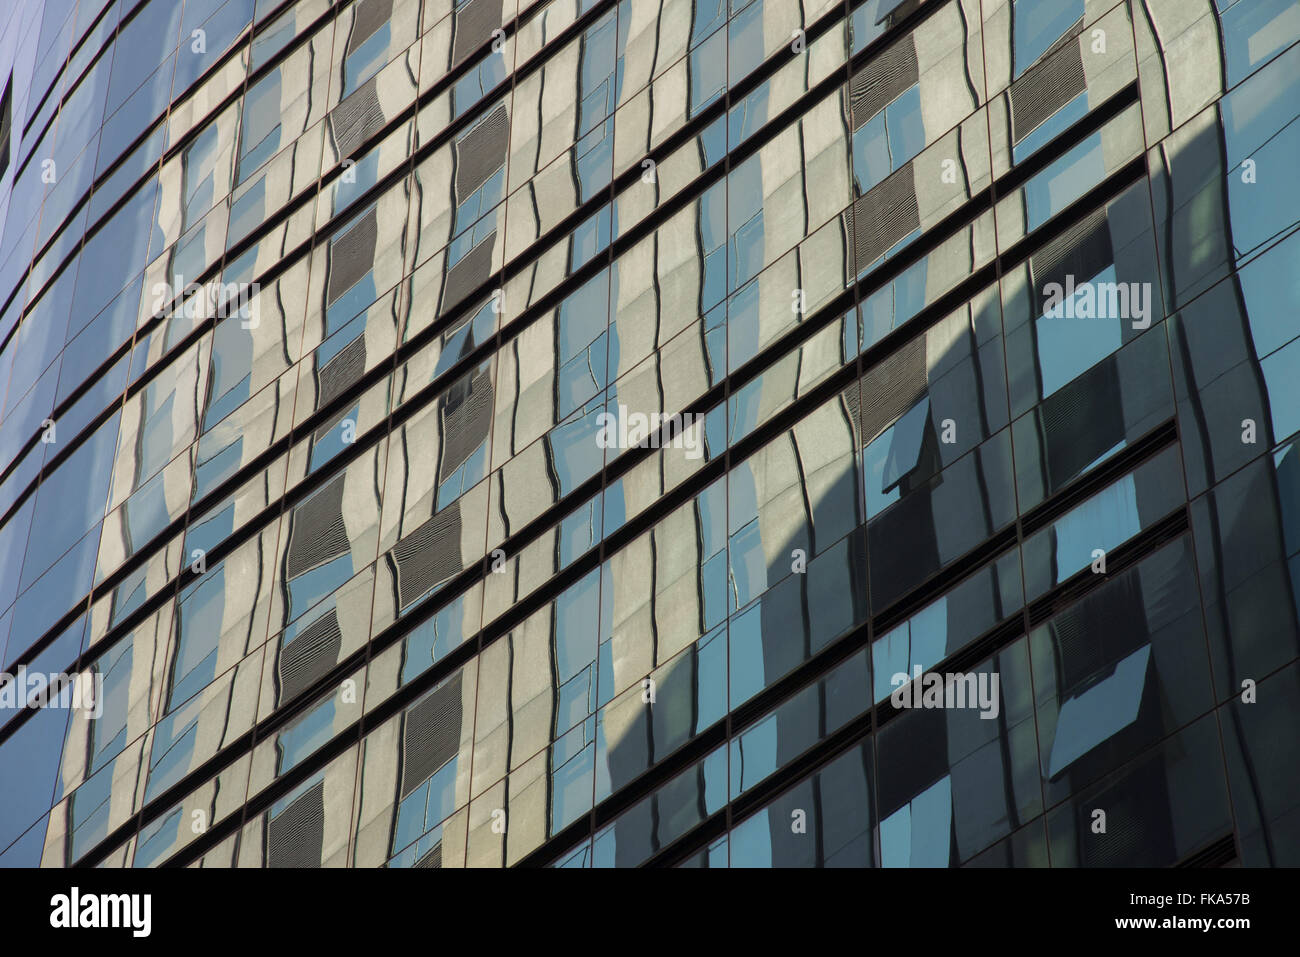 Reflection in glass side of business building in Itaim Stock Photo